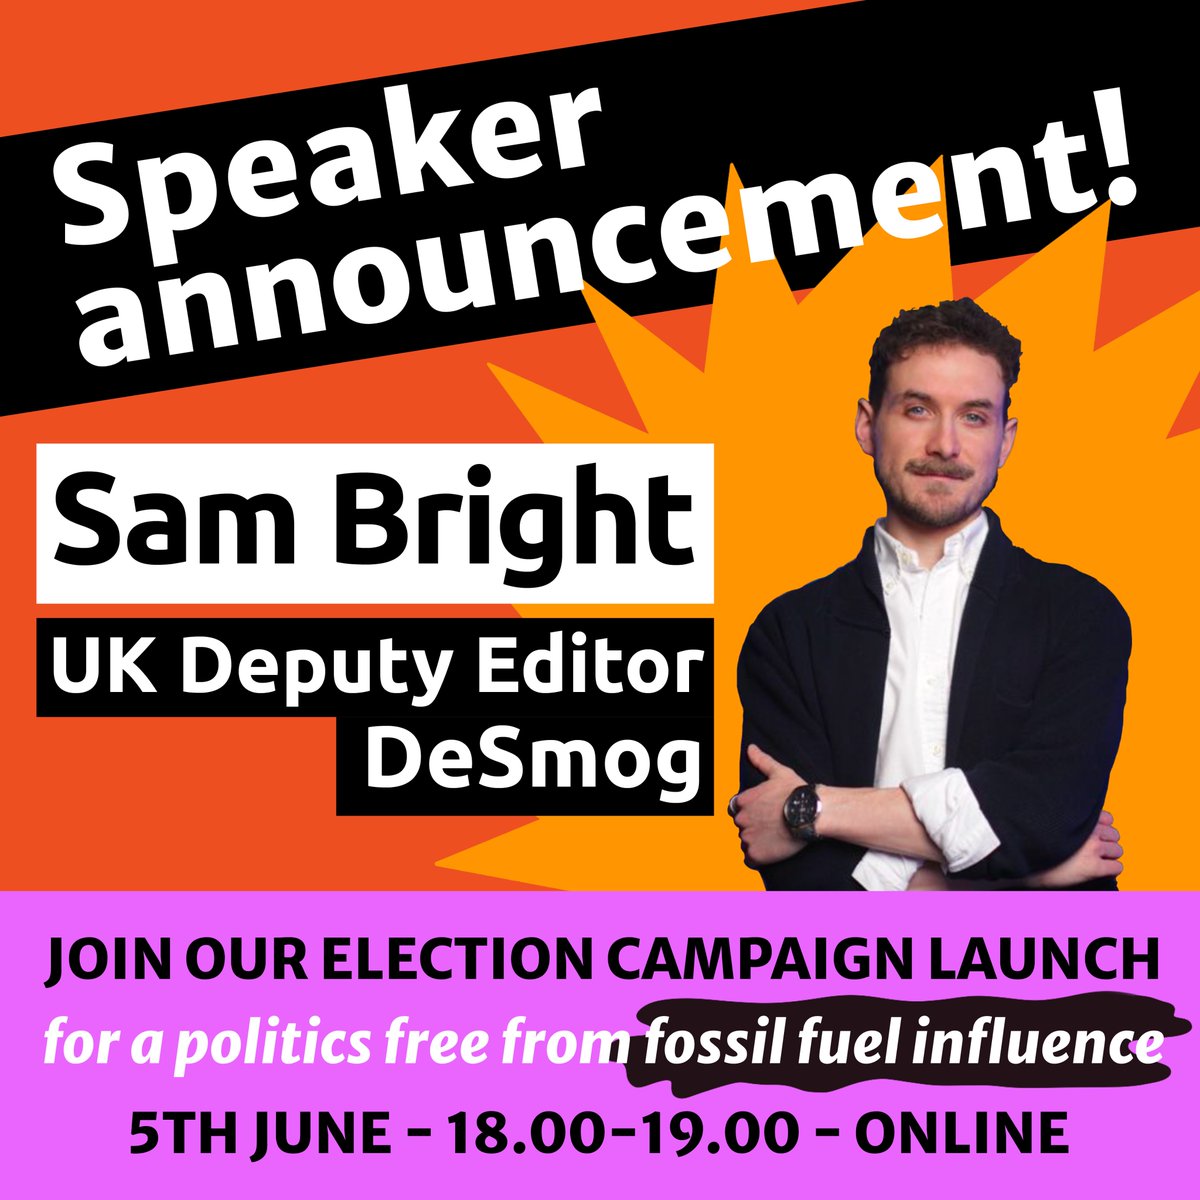 💥We're thrilled that Sam Bright - @WritesBright - UK Deputy Editor of @DeSmog, will be joining our election campaign launch next week to share fresh insights into fossil fuel industry lobbying.

Have you got your ticket yet?

Sign up here for free! 🥳
bit.ly/ffp-election-c…